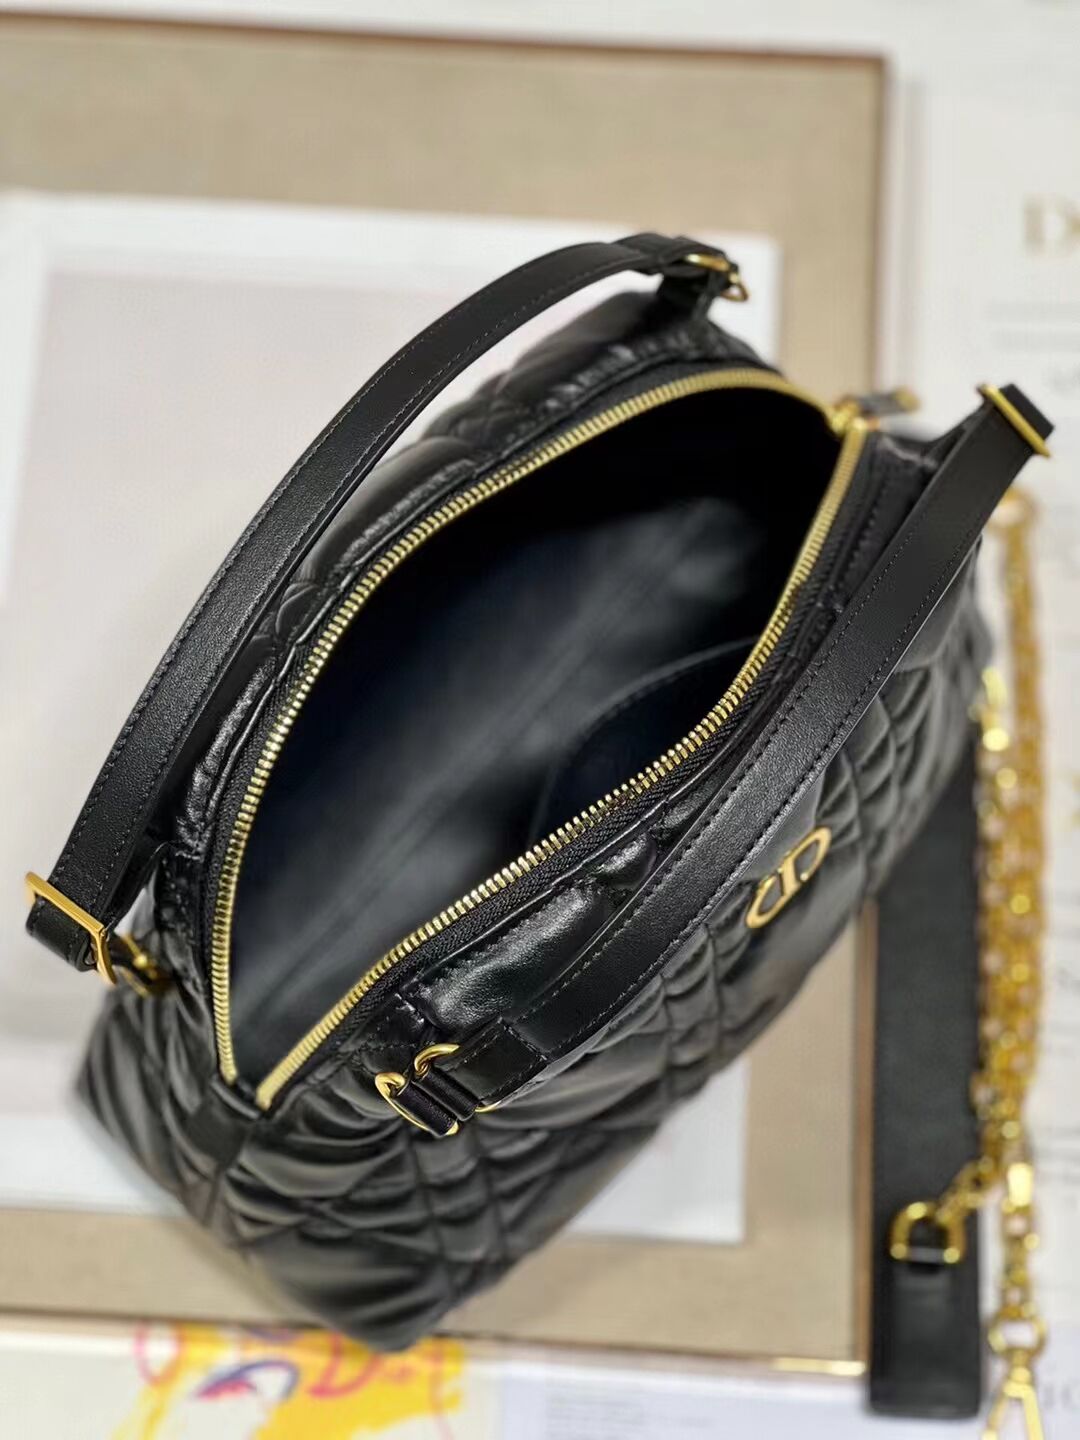 LADY DIOR TOP HANDLE SMALL BAG Latte Cannage Lambskin C0656 BLACK